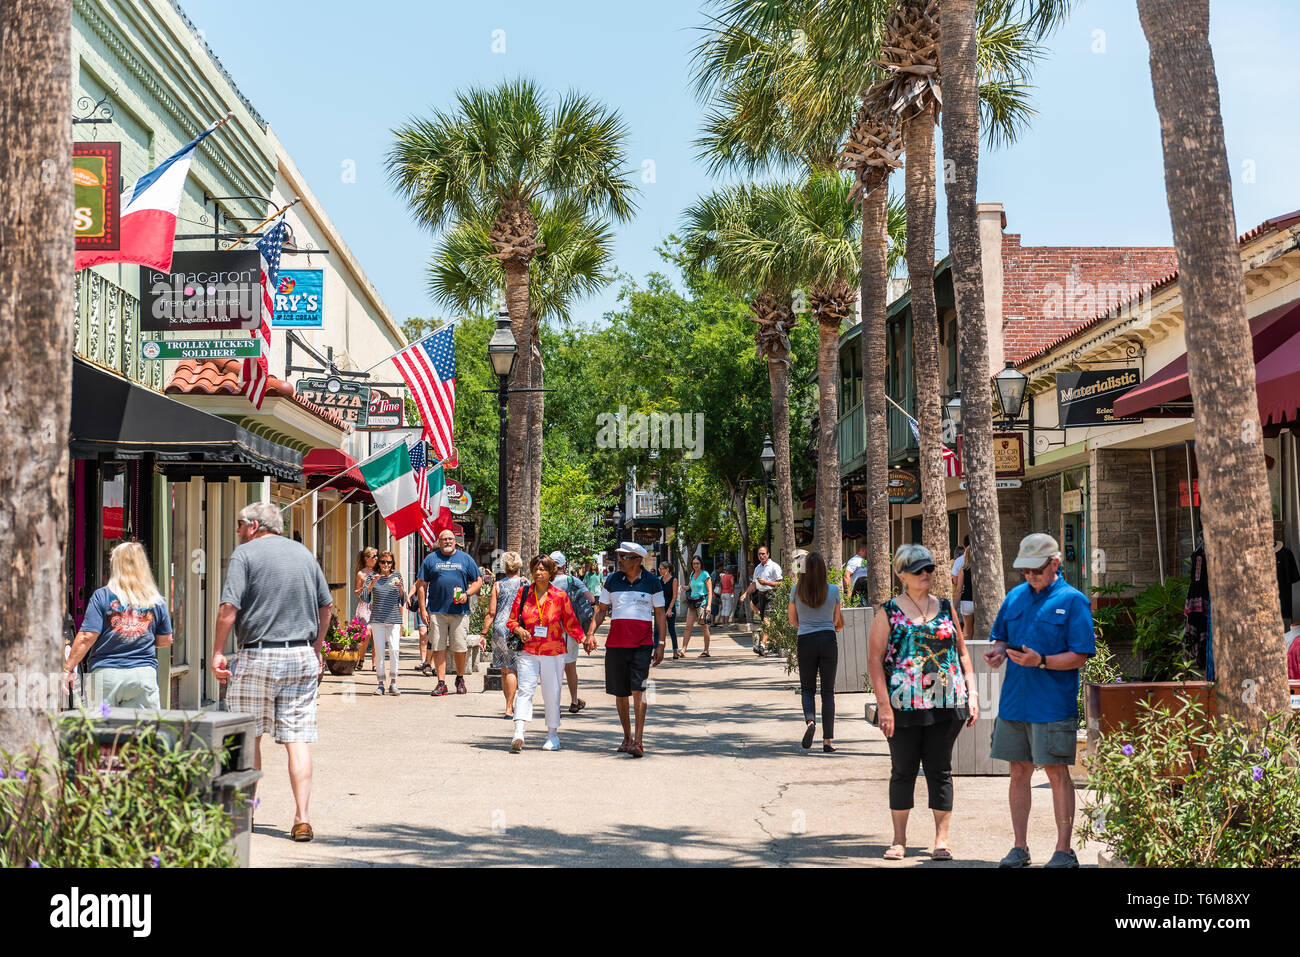 St. Augustine, USA - May 10, 2018: St George Street and people walking during day by colorful restaurants and stores in downtown old town Florida city Stock Photo